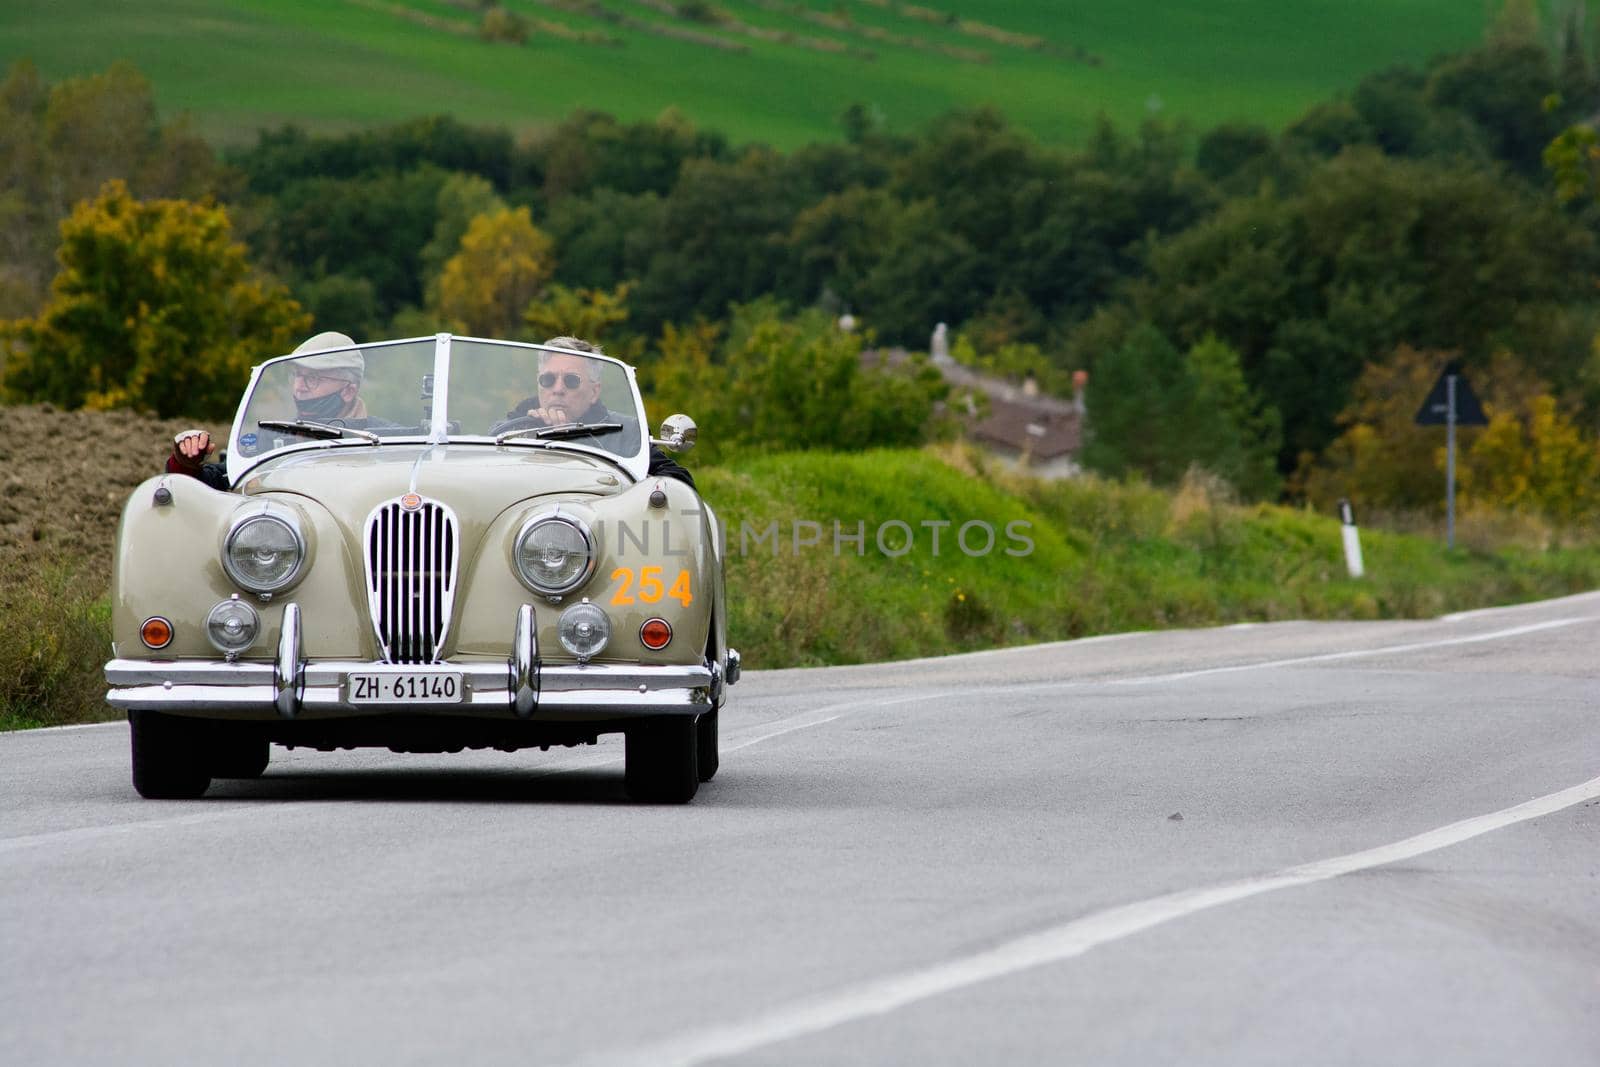 JAGUAR XK 140 OTS SE 1954 on an old racing car in rally Mille Miglia 2020 the famous italian historical race (1927-1957 by massimocampanari